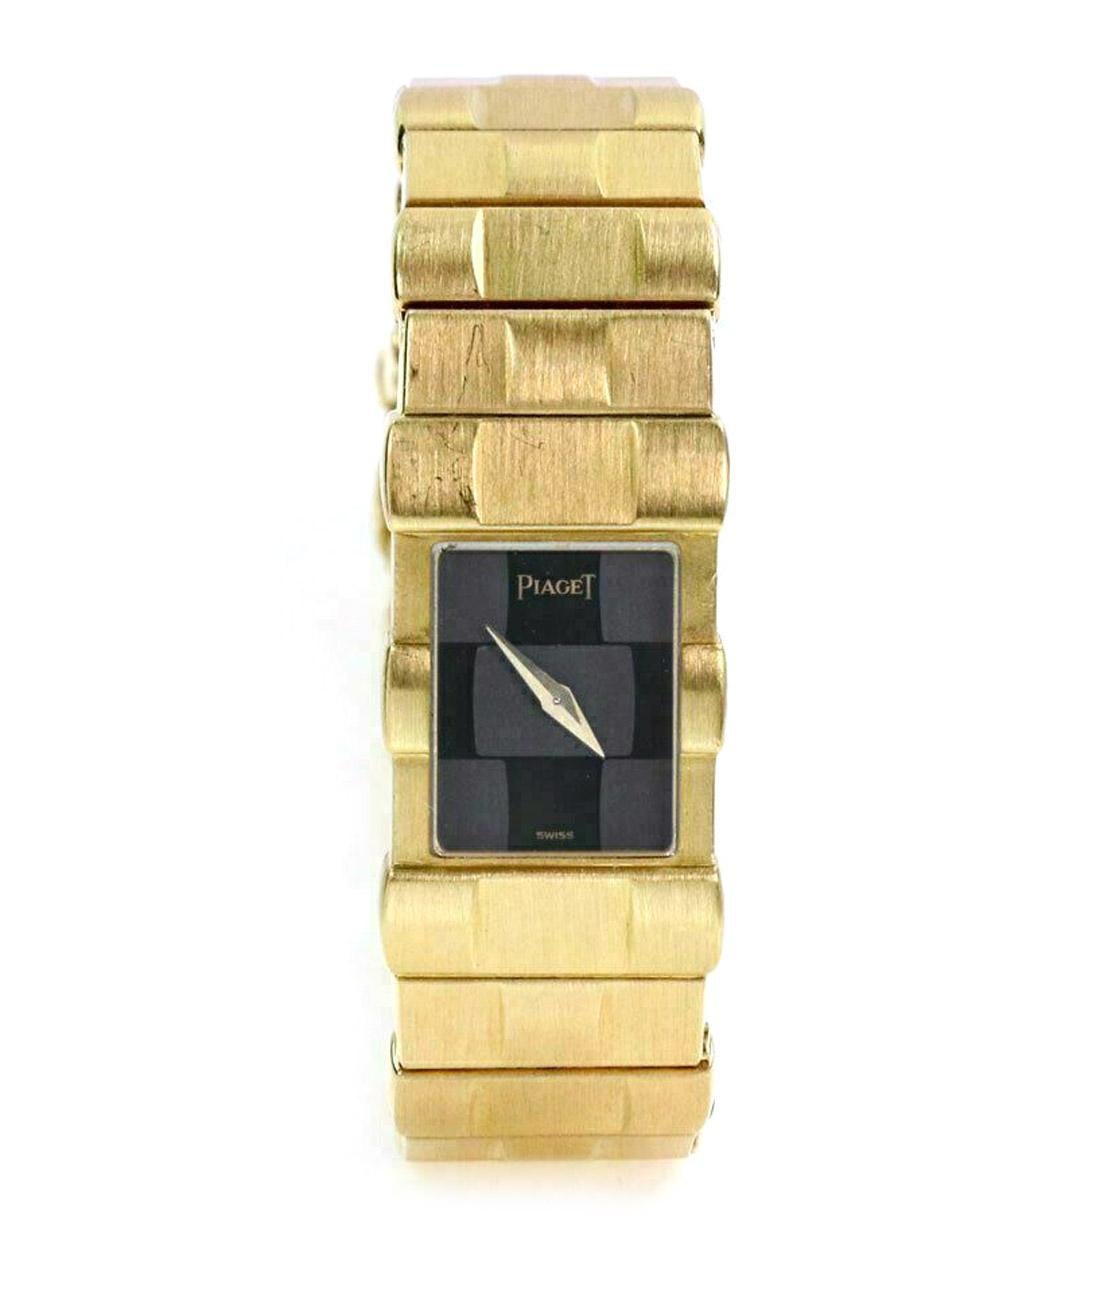 This elegant authentic ladies wrist watch is by Piaget form the POLO collection. The case and band is crafted from solid 18k yellow gold featuring a lovely solid gold link bracelet with a black dial watch and gold tone hands. Sapphire crystal, the